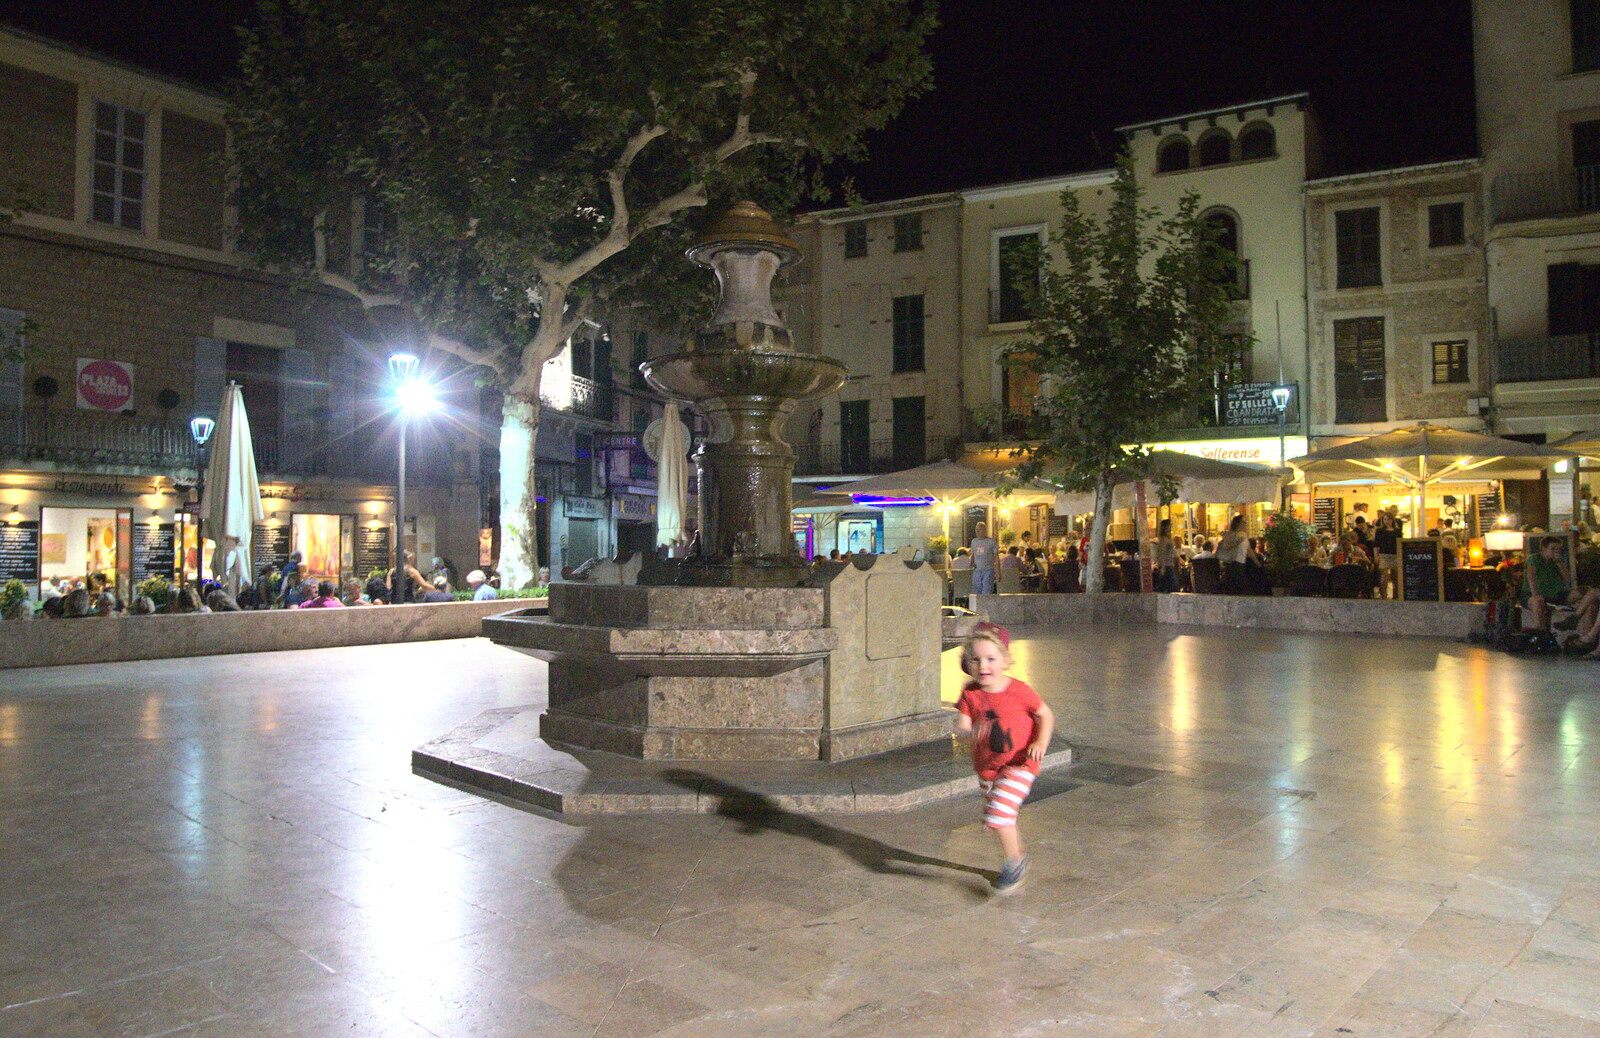 Fred runs around the square from A Trip to Sóller, Mallorca, Spain - 8th-14th September 2012